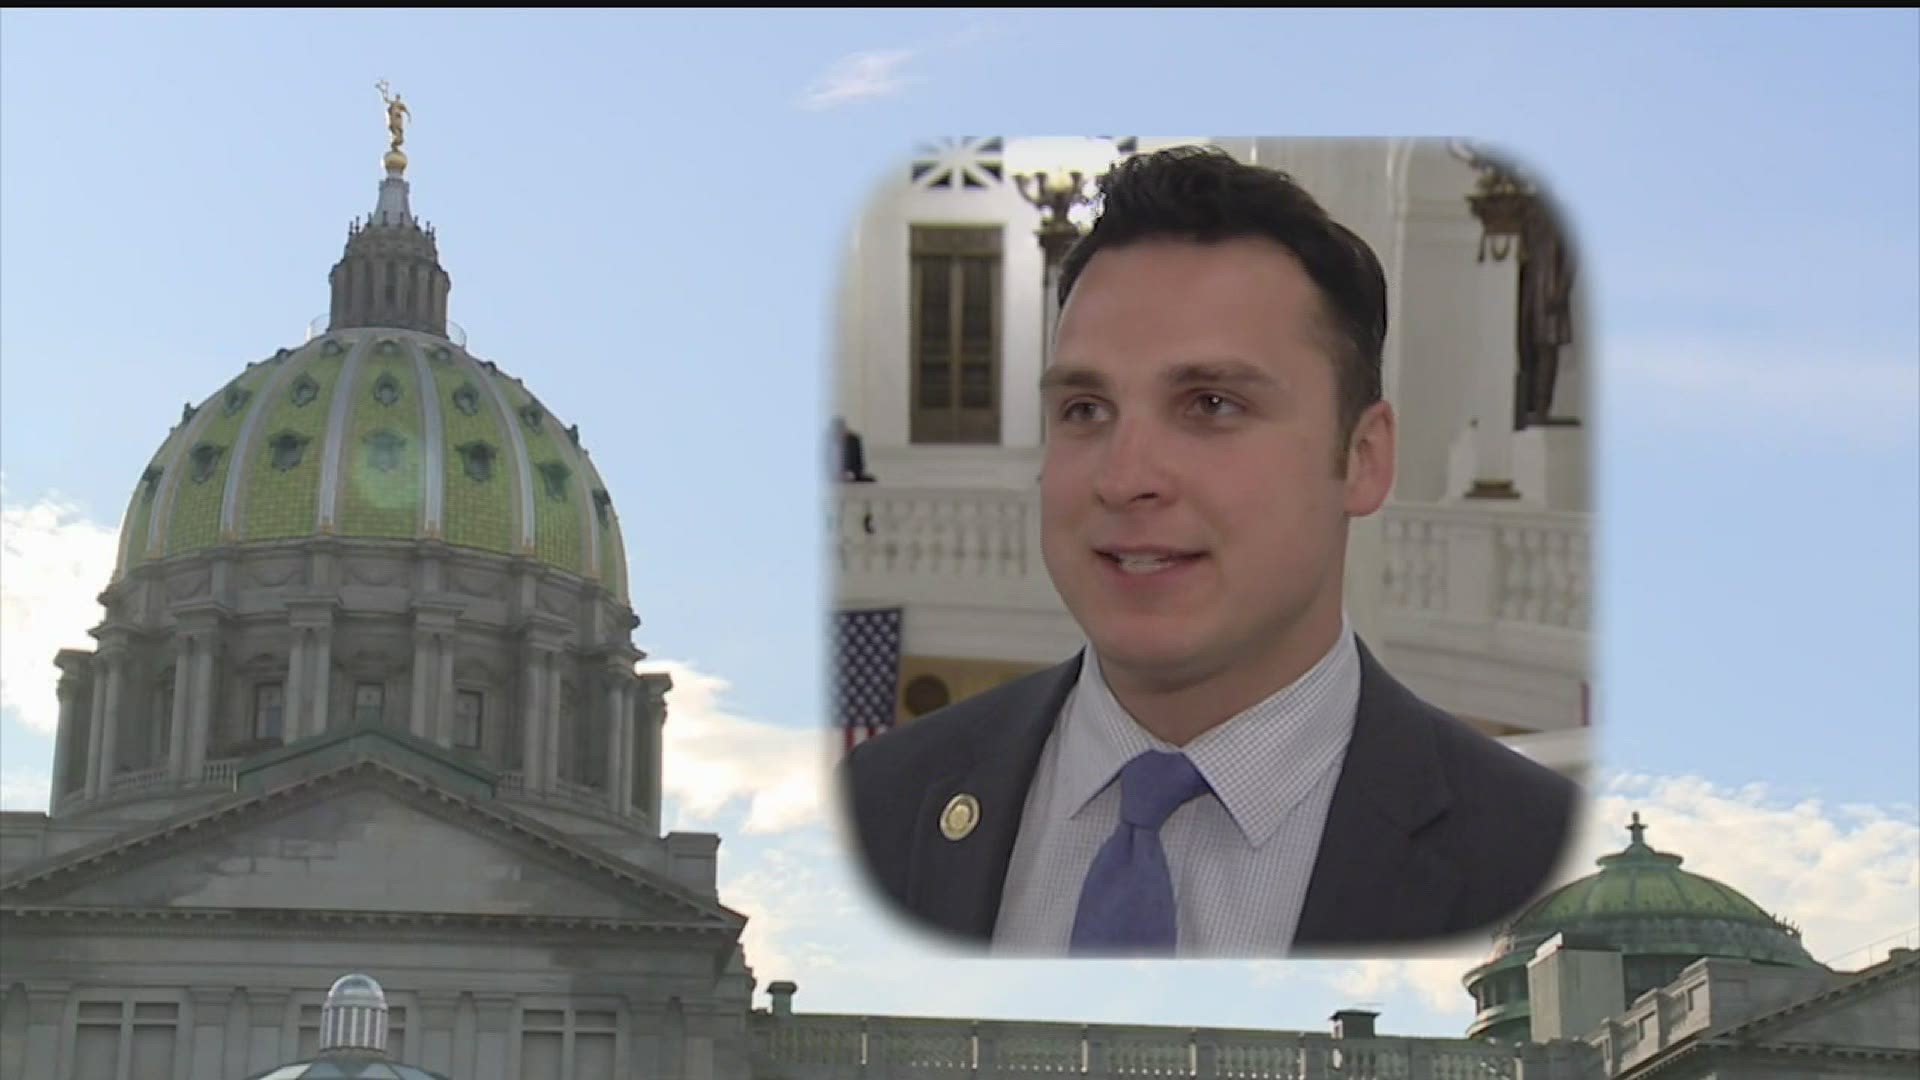 The Dauphin County Republican said he has fully recovered and spent two weeks in self-isolation after testing positive May 18. He said he suffered "mild" symptoms.